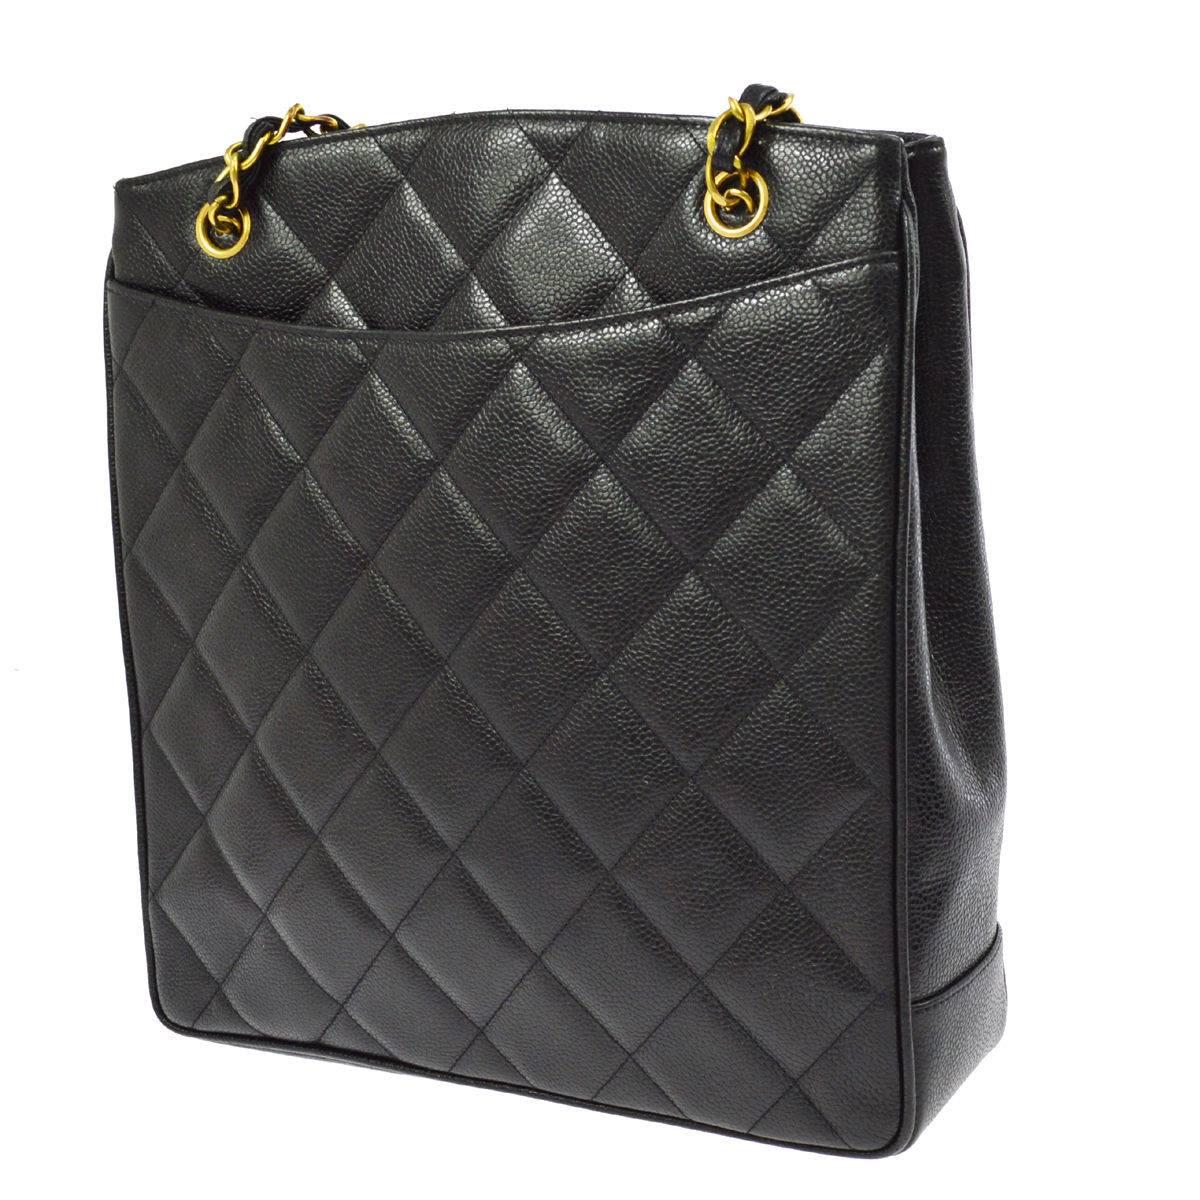 Women's Chanel Black Caviar Leather Quilted Gold Shopper Carryall Tote Shoulder Bag